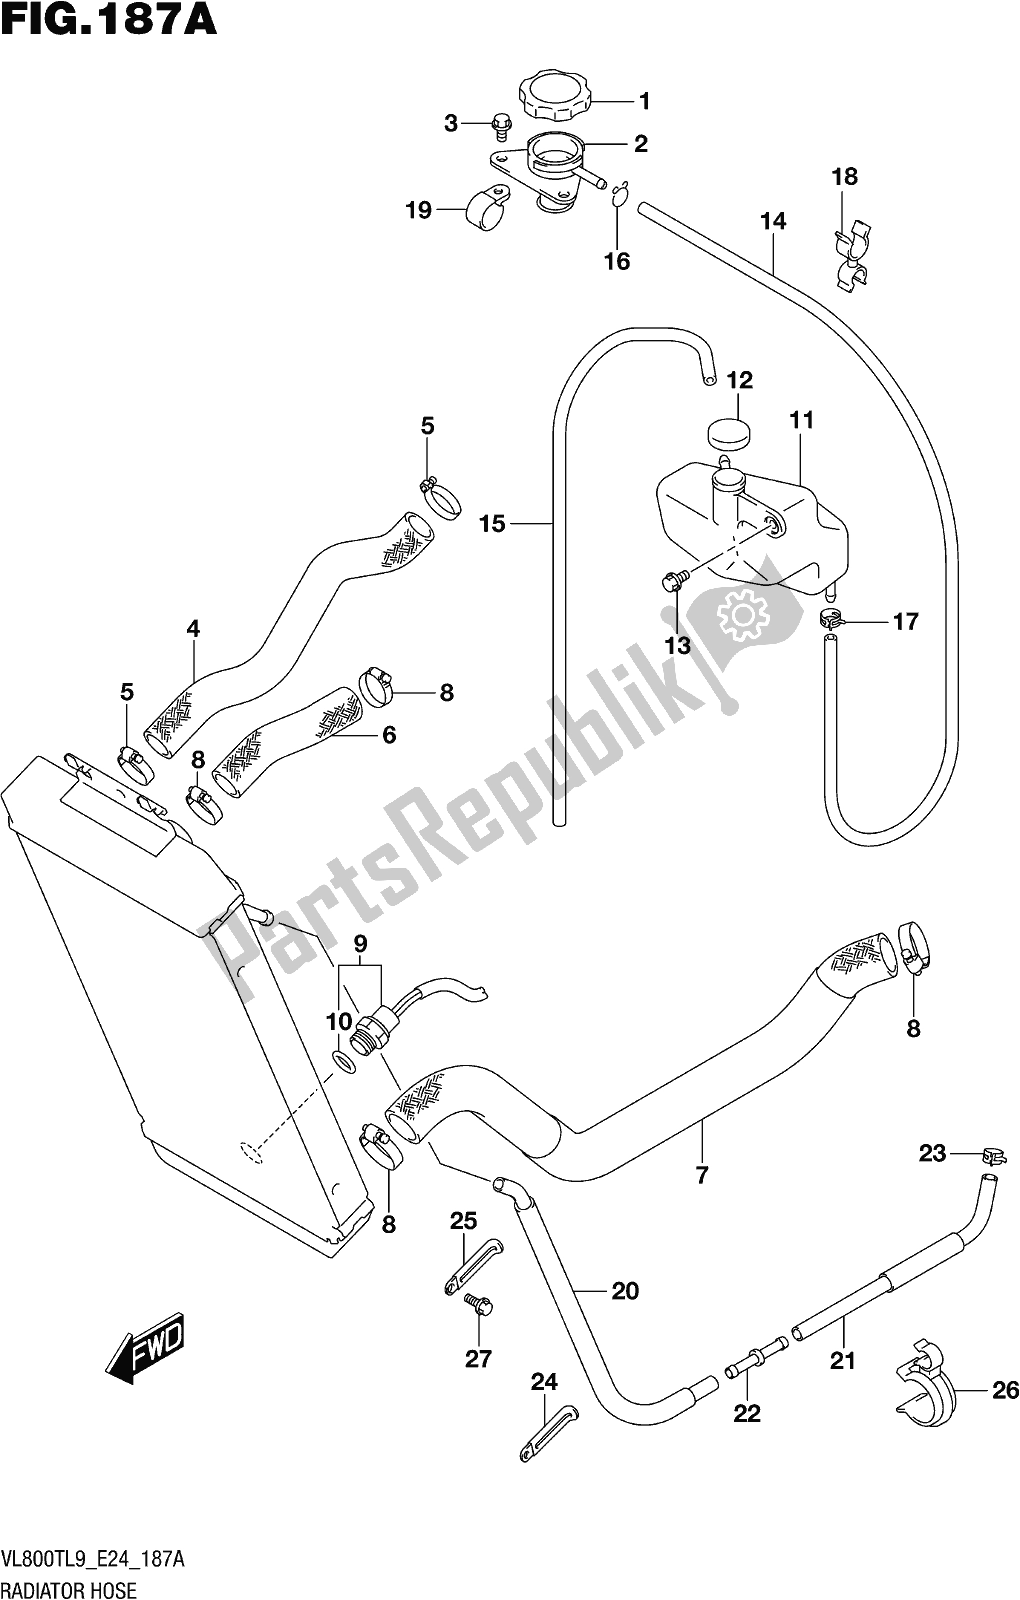 All parts for the Fig. 187a Radiator Hose of the Suzuki VL 800T 2019